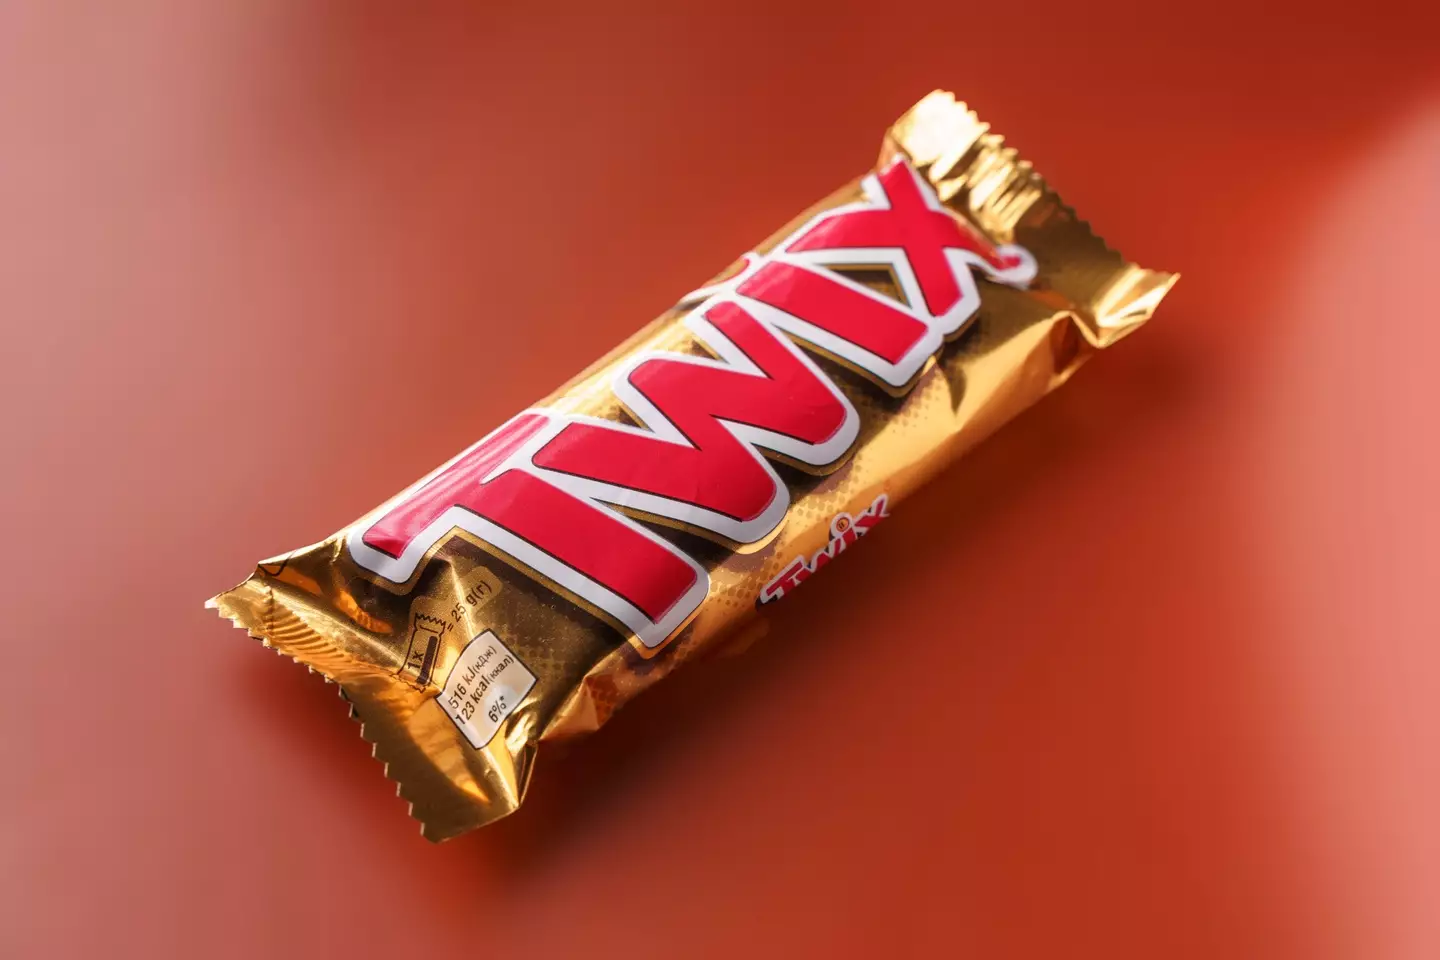 The Twix has been hit by 'shrinkflation'.